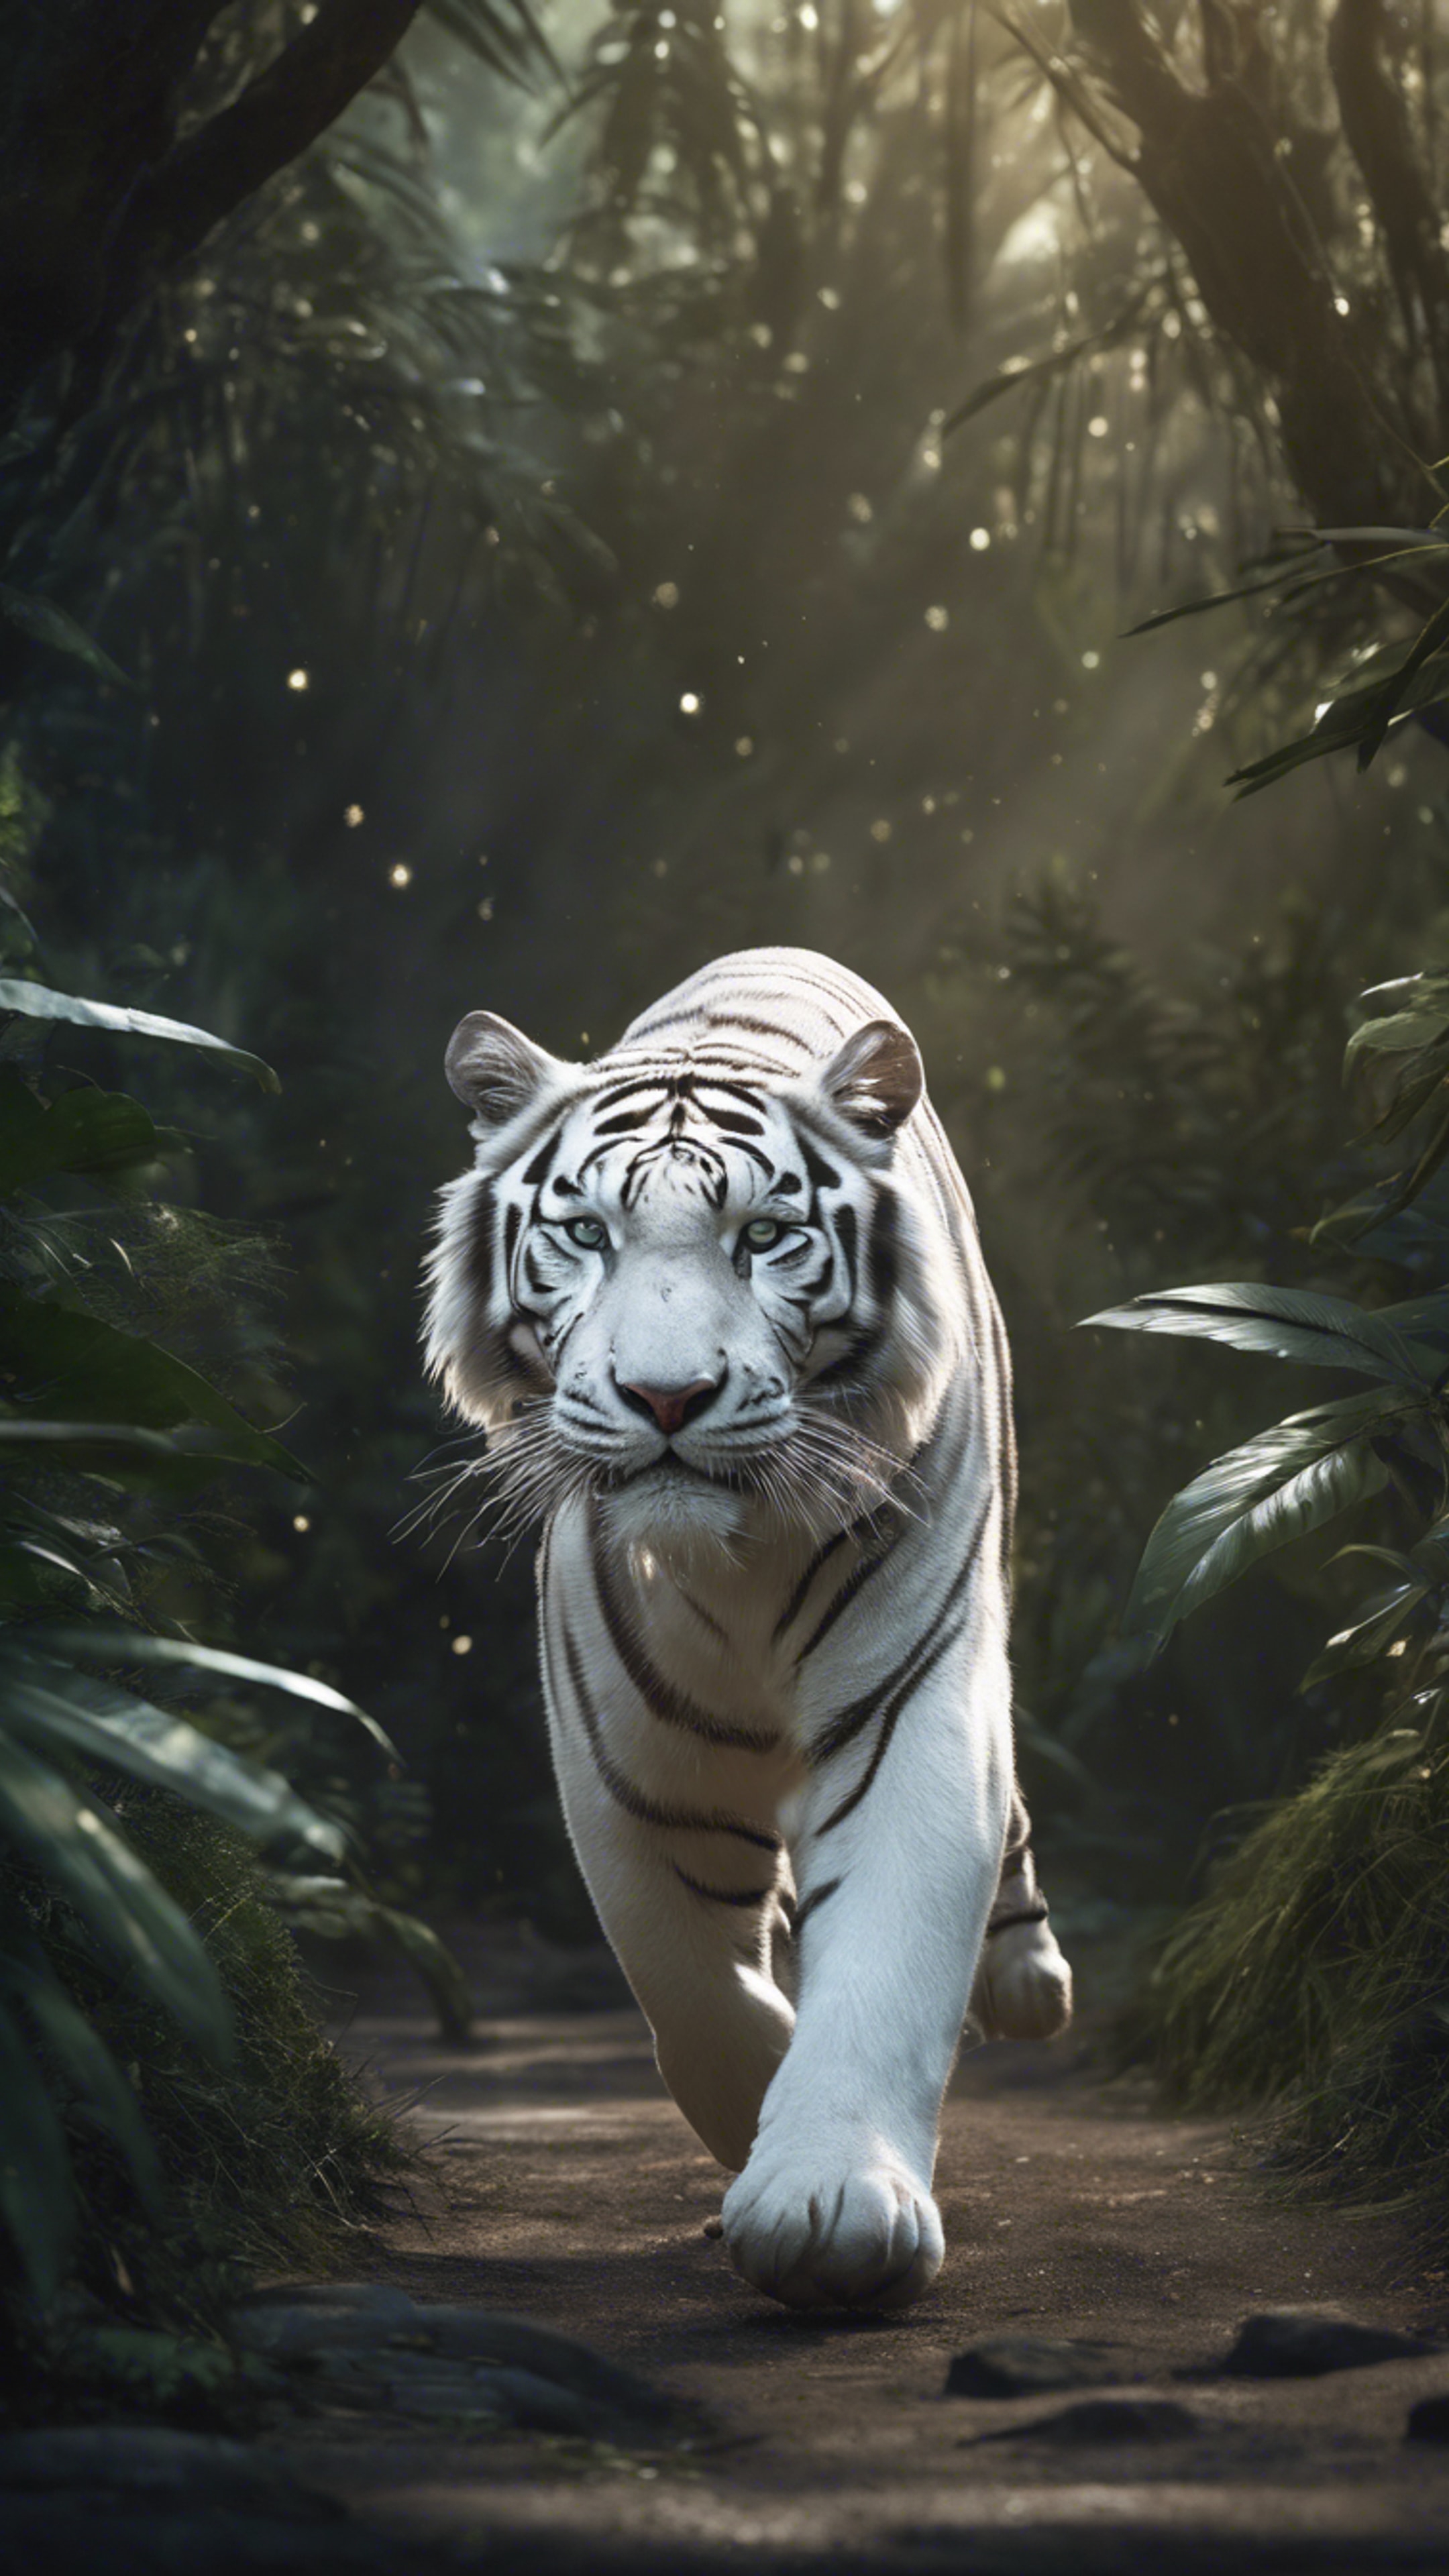 A cool white tiger, with silver stripes, strides powerfully through a moonlit jungle. 牆紙[5d9925a4be334da199e0]